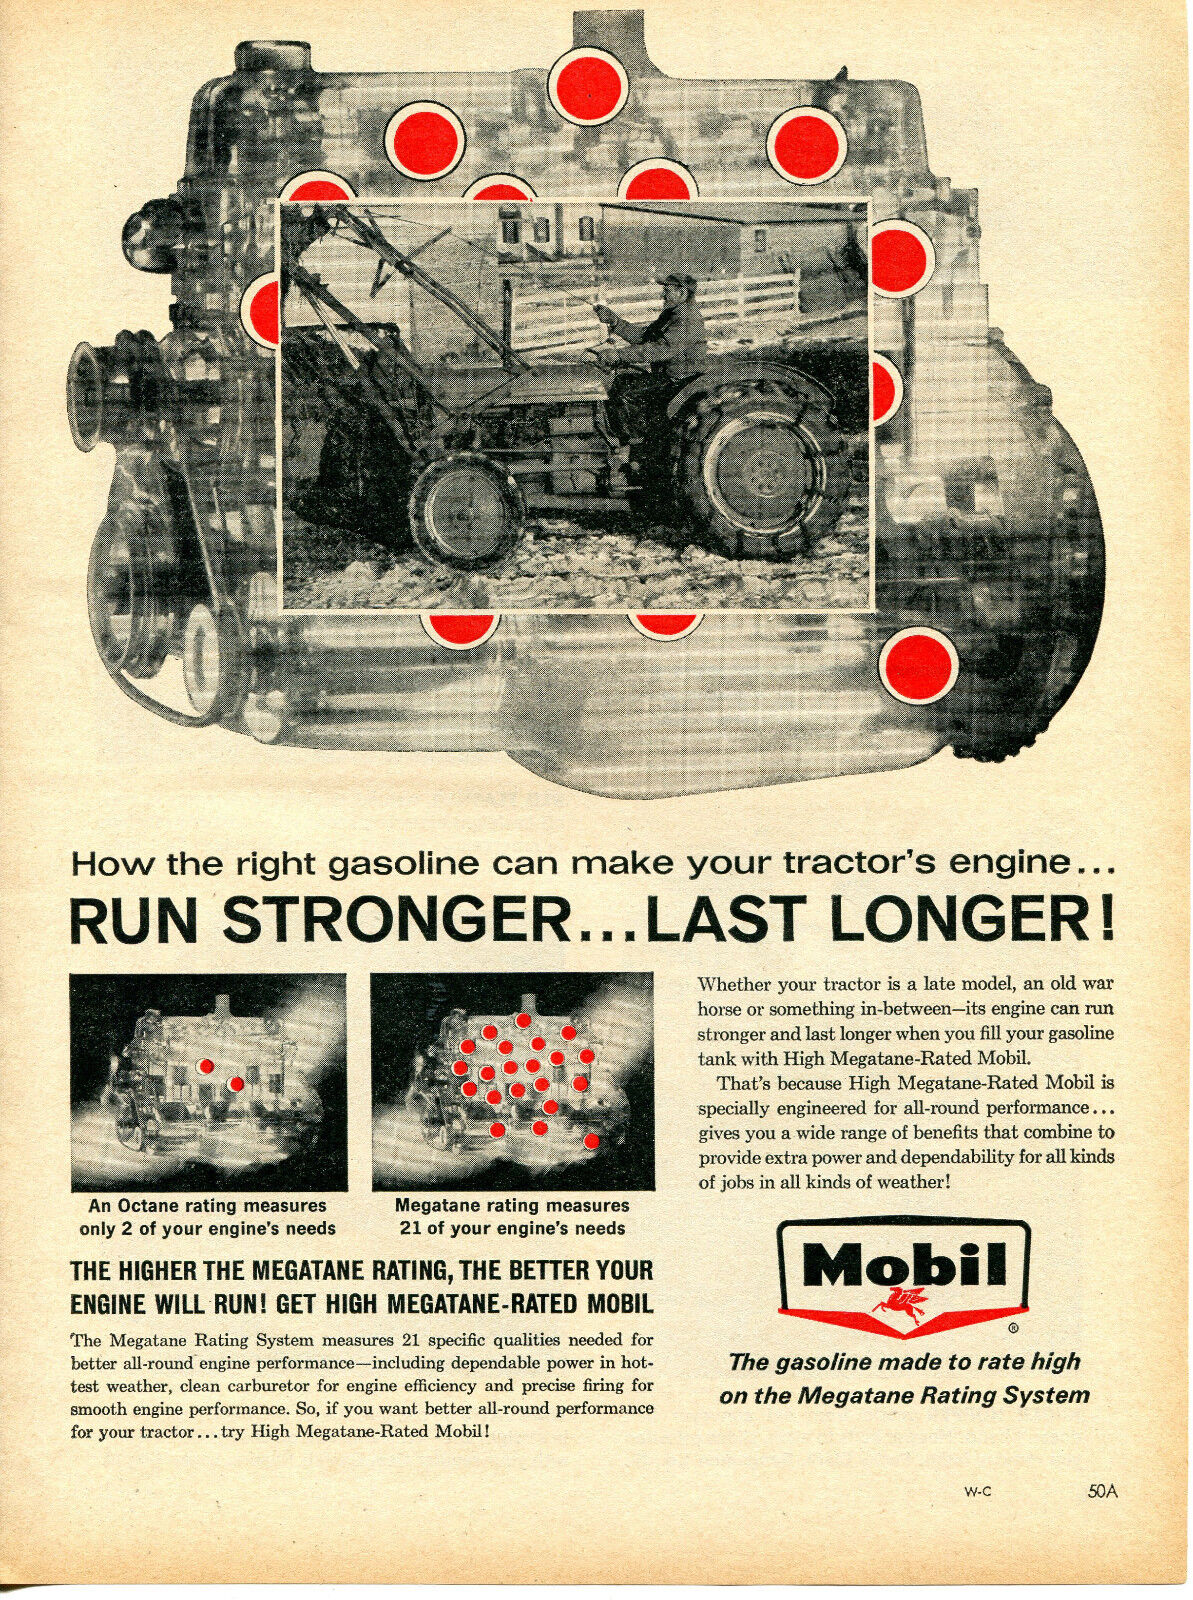 1964 Mobil High Megatane Rated Tractor Gasoline Print Ad